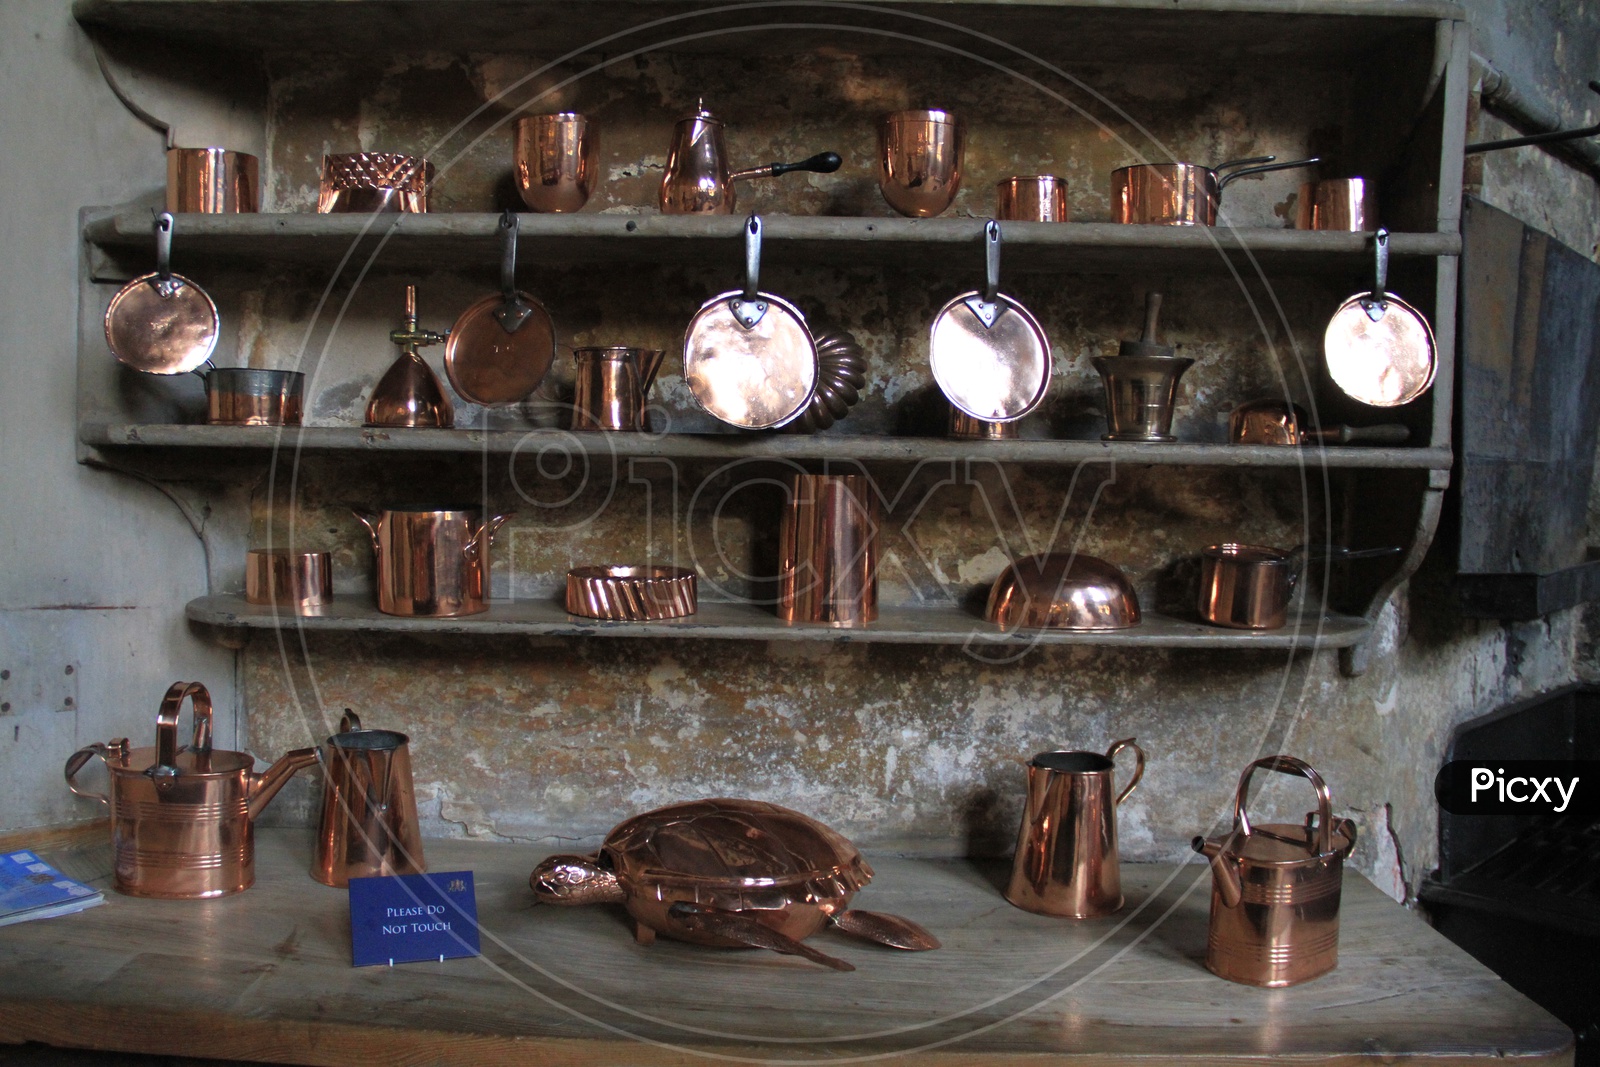 Copper Utensils in the Kitchen at Burghley House